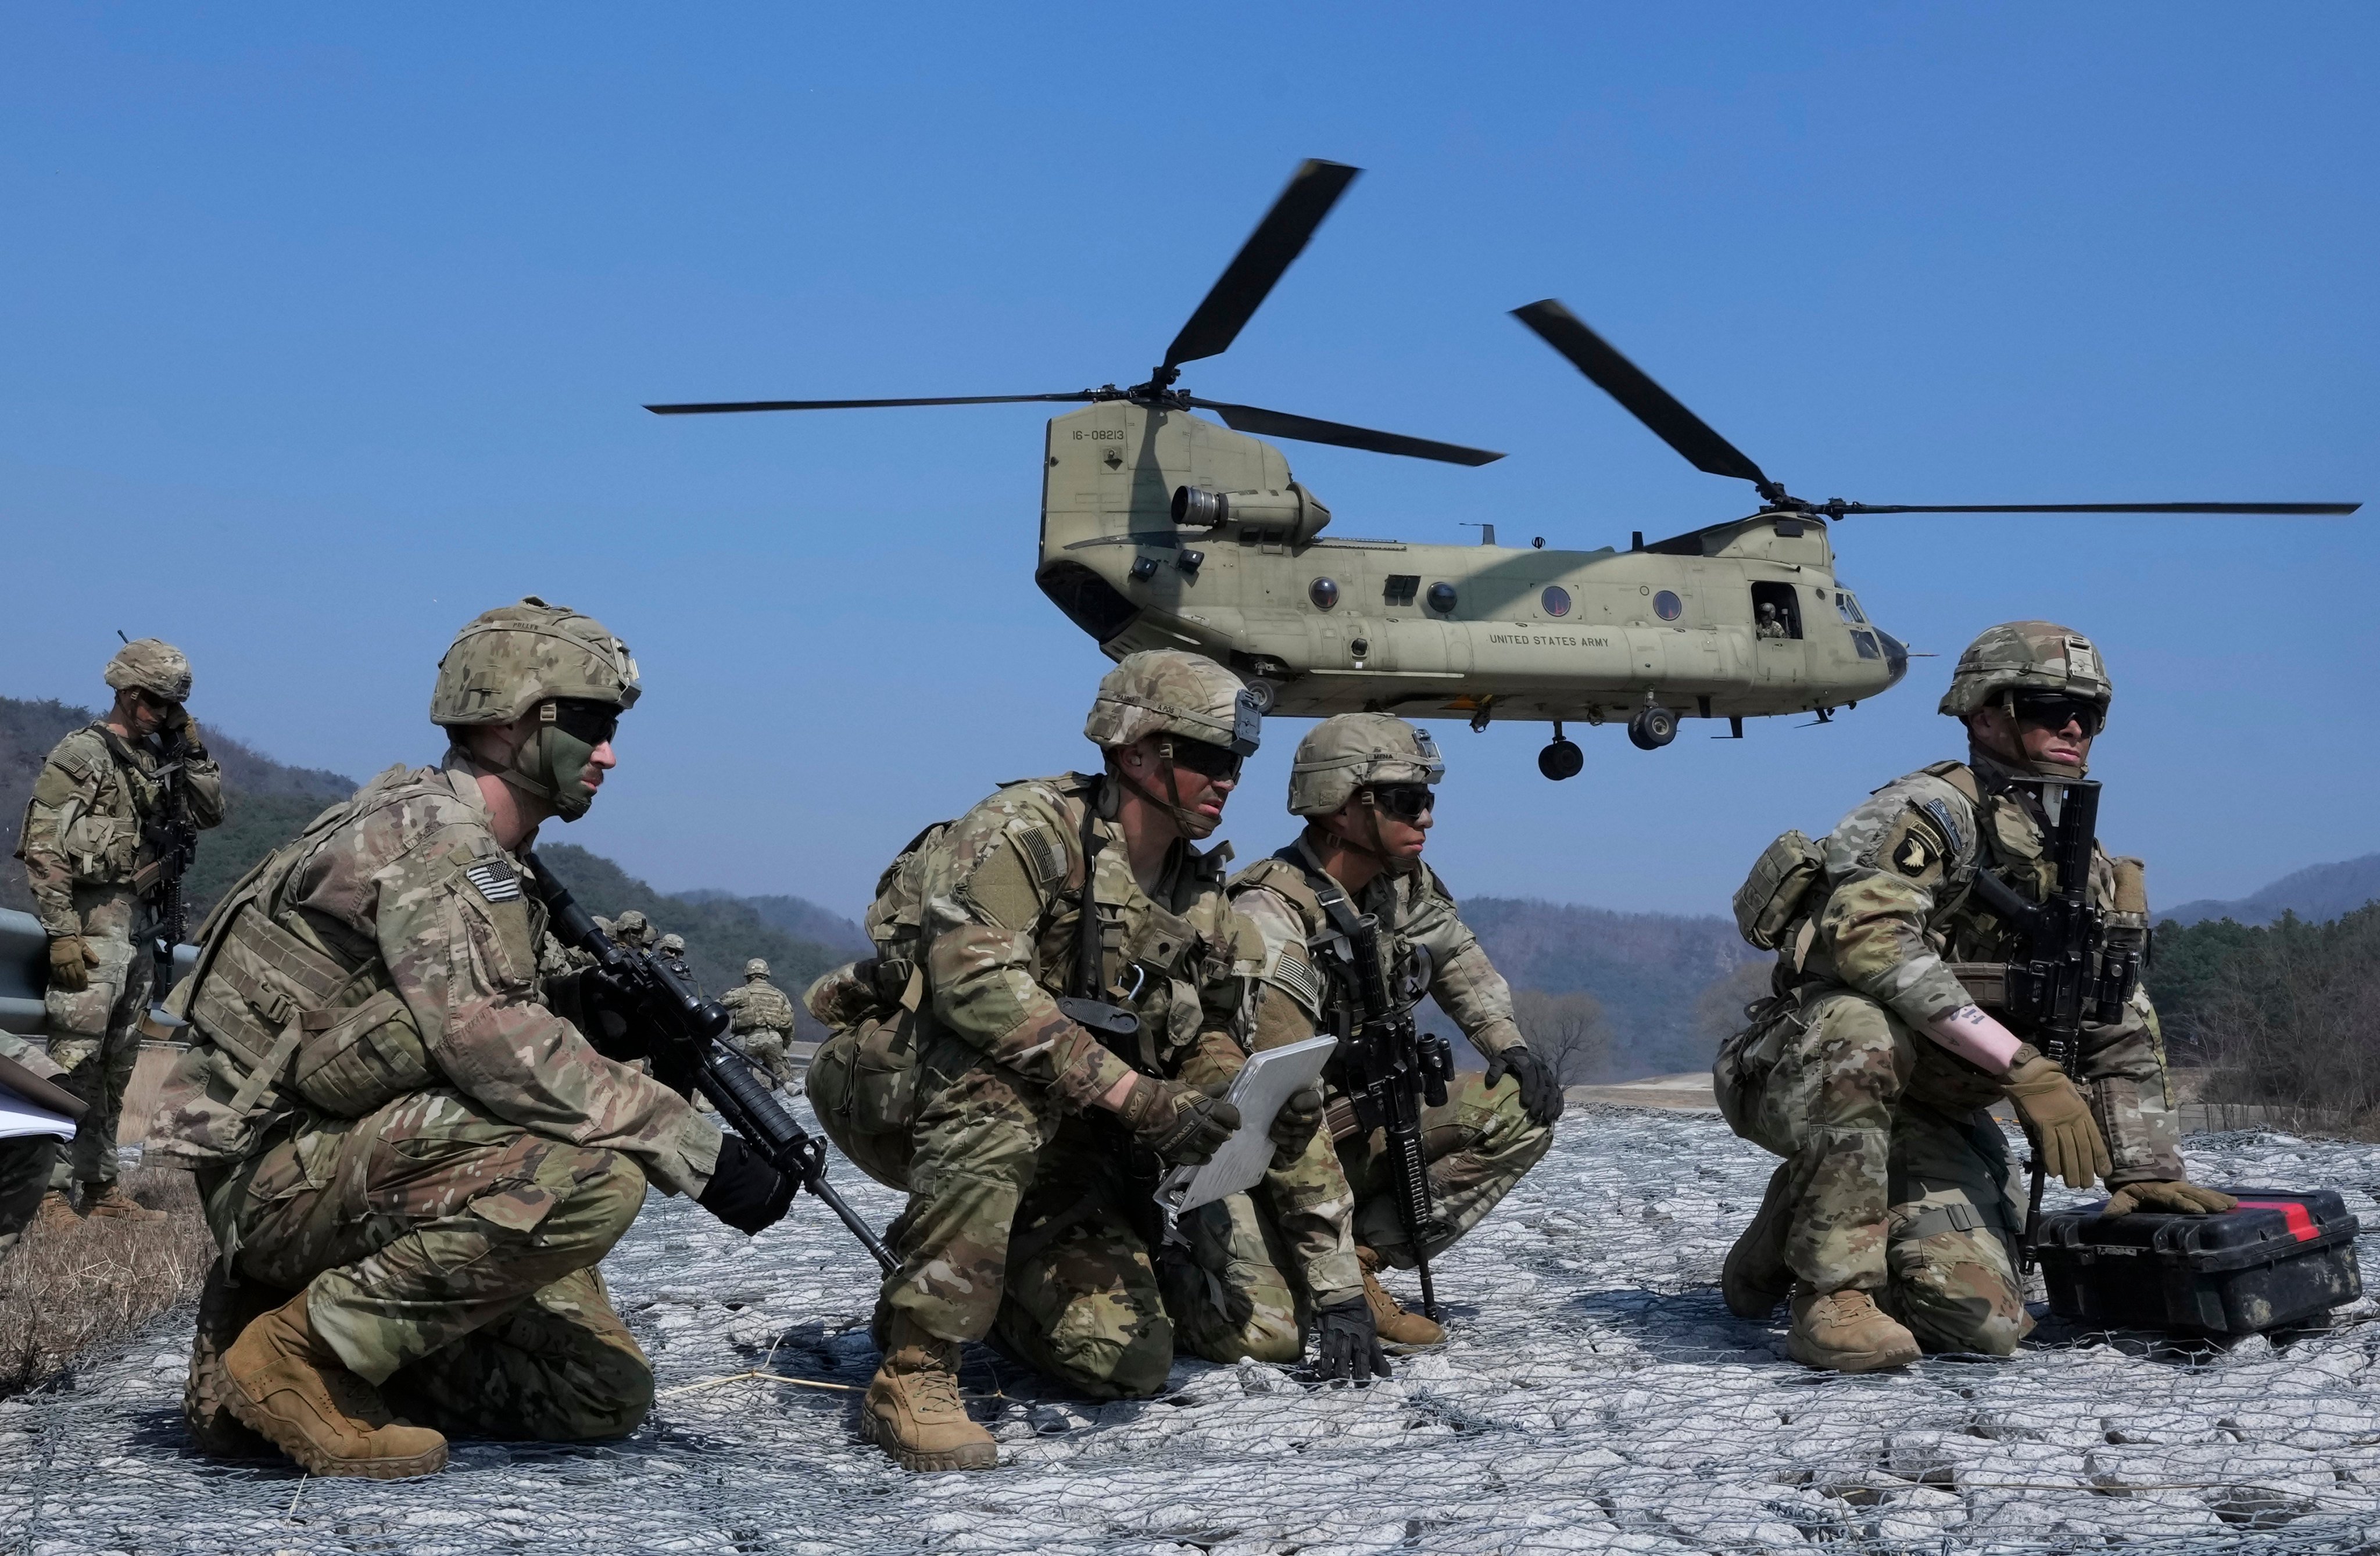 US Army soldiers wait to board their helicopter during a joint military drill between South Korea and the United States at Rodriguez Live Fire Complex in Pocheon, South Korea, on March 19. North Korea launched a short-range ballistic missile toward the sea on Sunday, its neighbours said, ramping up testing activities in response to US-South Korean military drills that it views as an invasion rehearsal. Photo: AP 